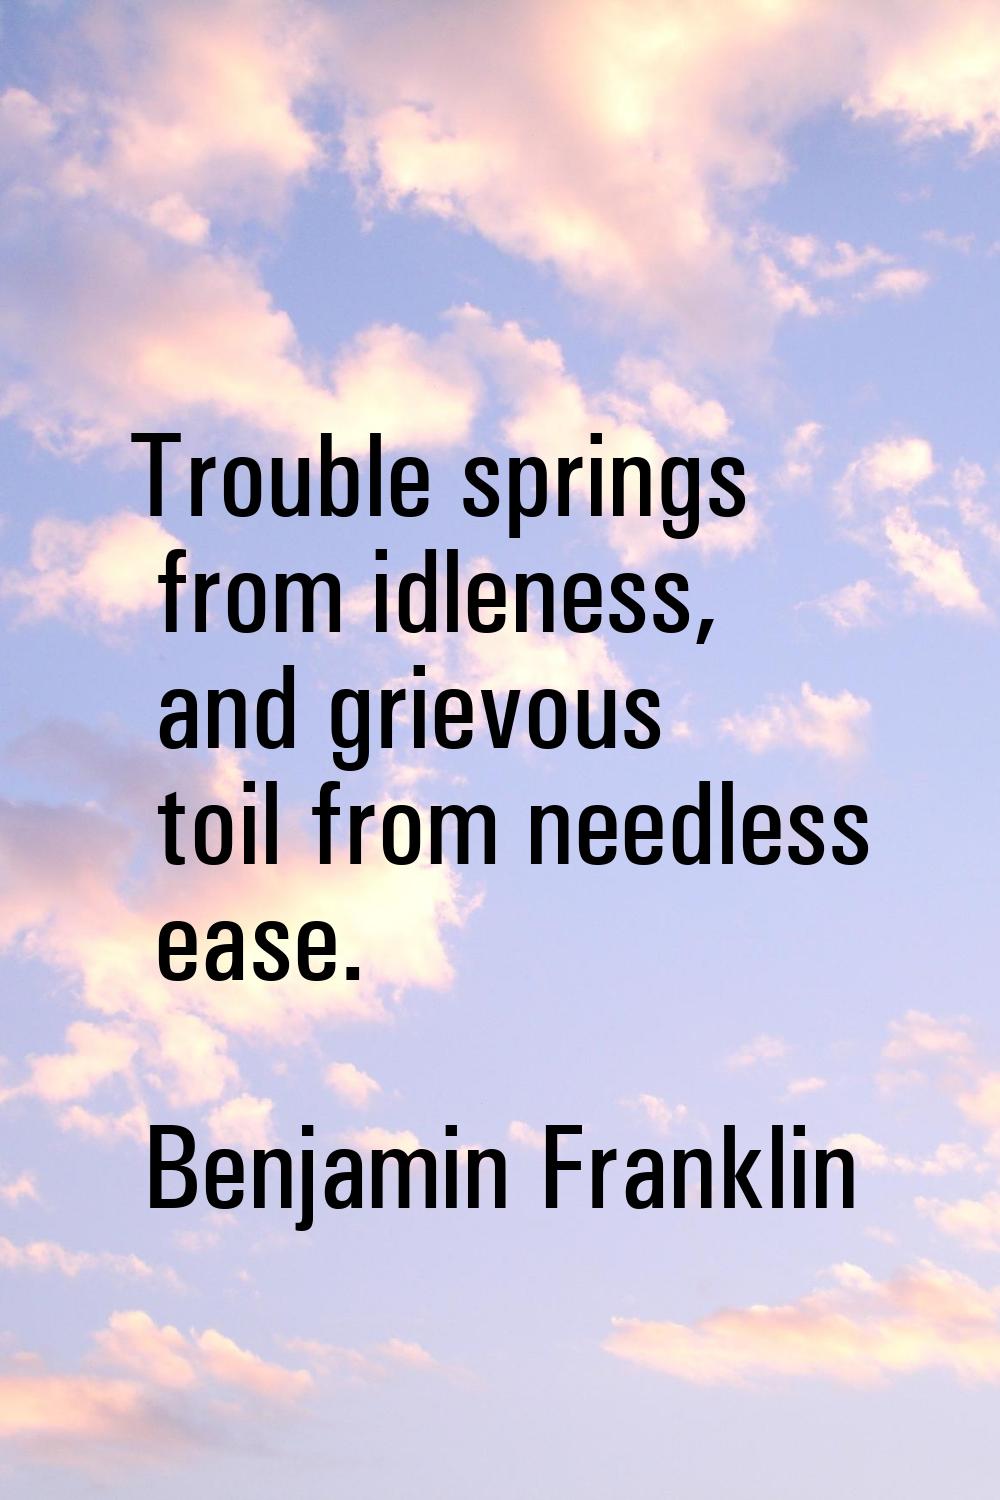 Trouble springs from idleness, and grievous toil from needless ease.